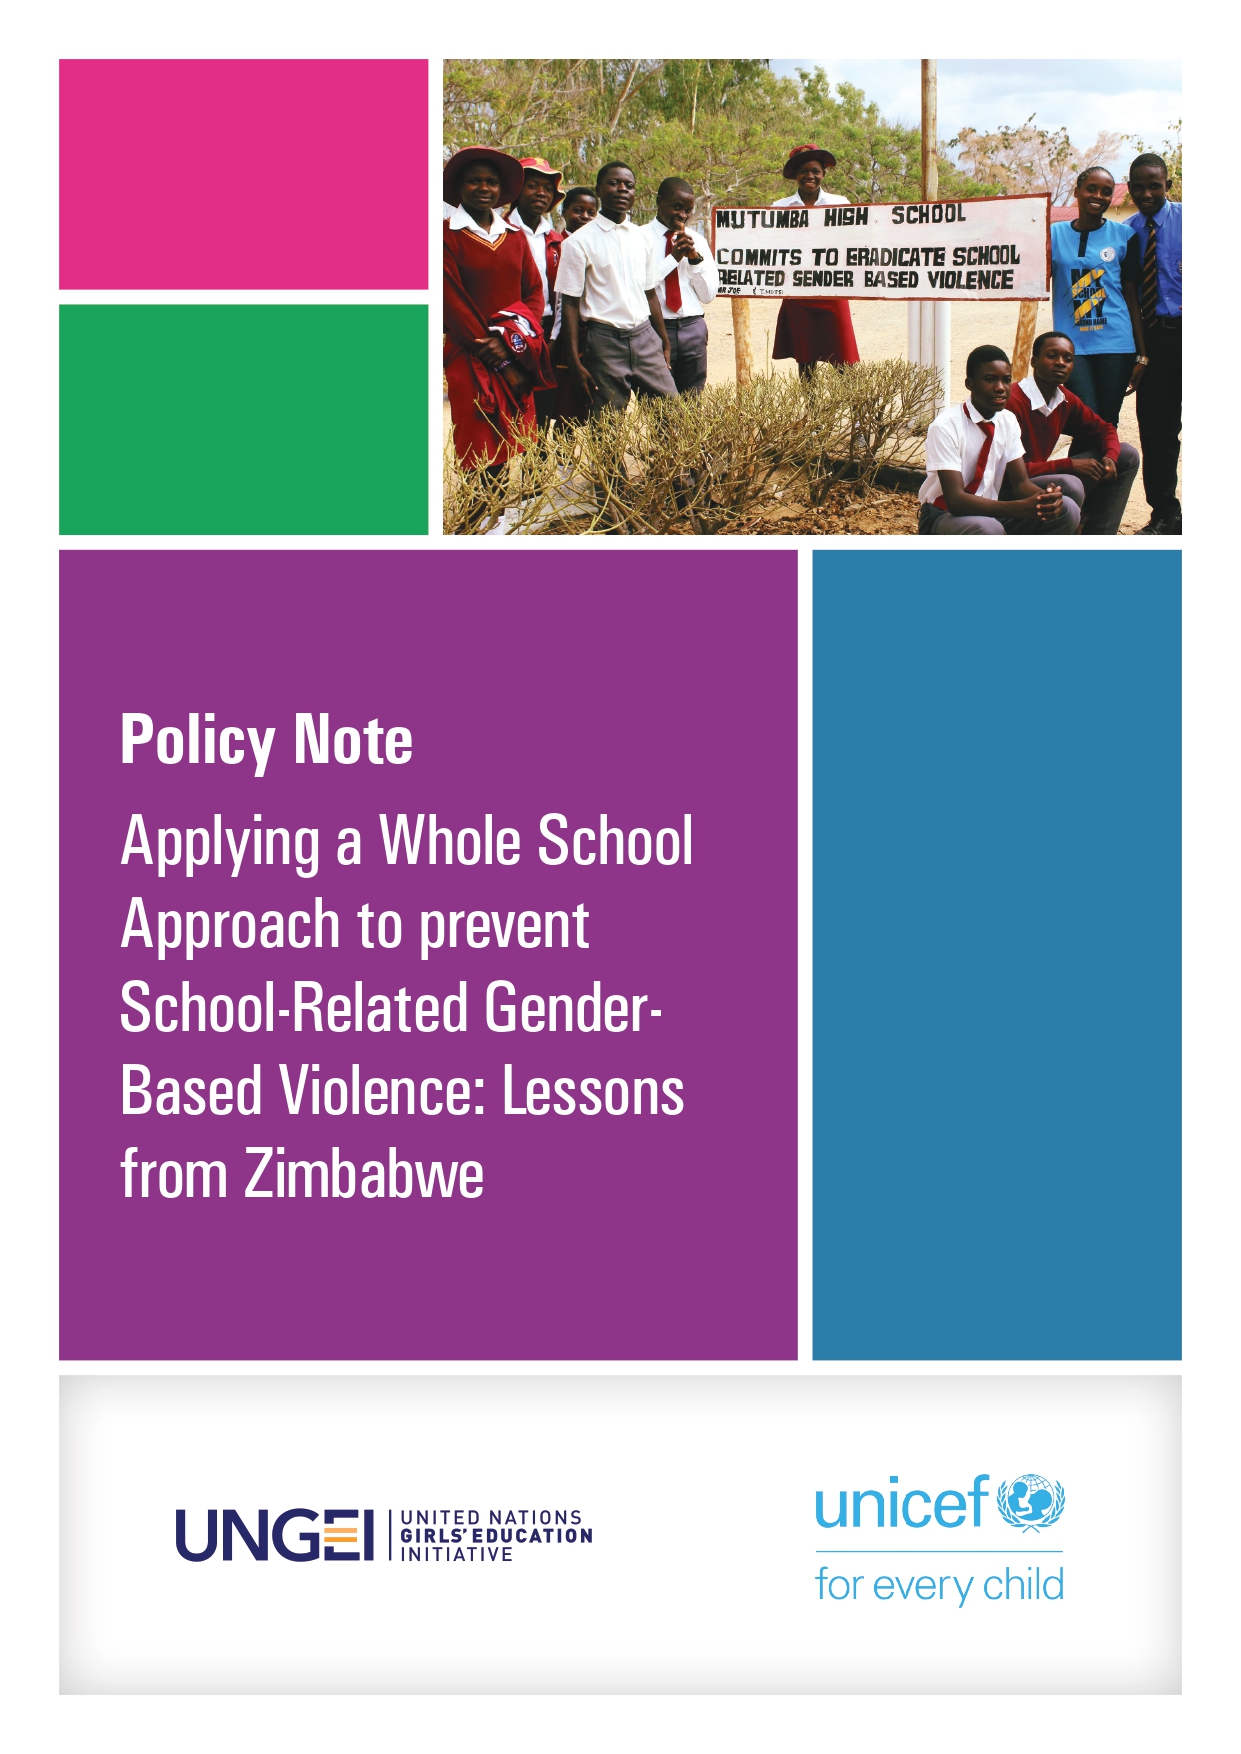 Applying a Whole School Approach to prevent School-Related Gender-Based Violence: Lessons from Zimbabwe